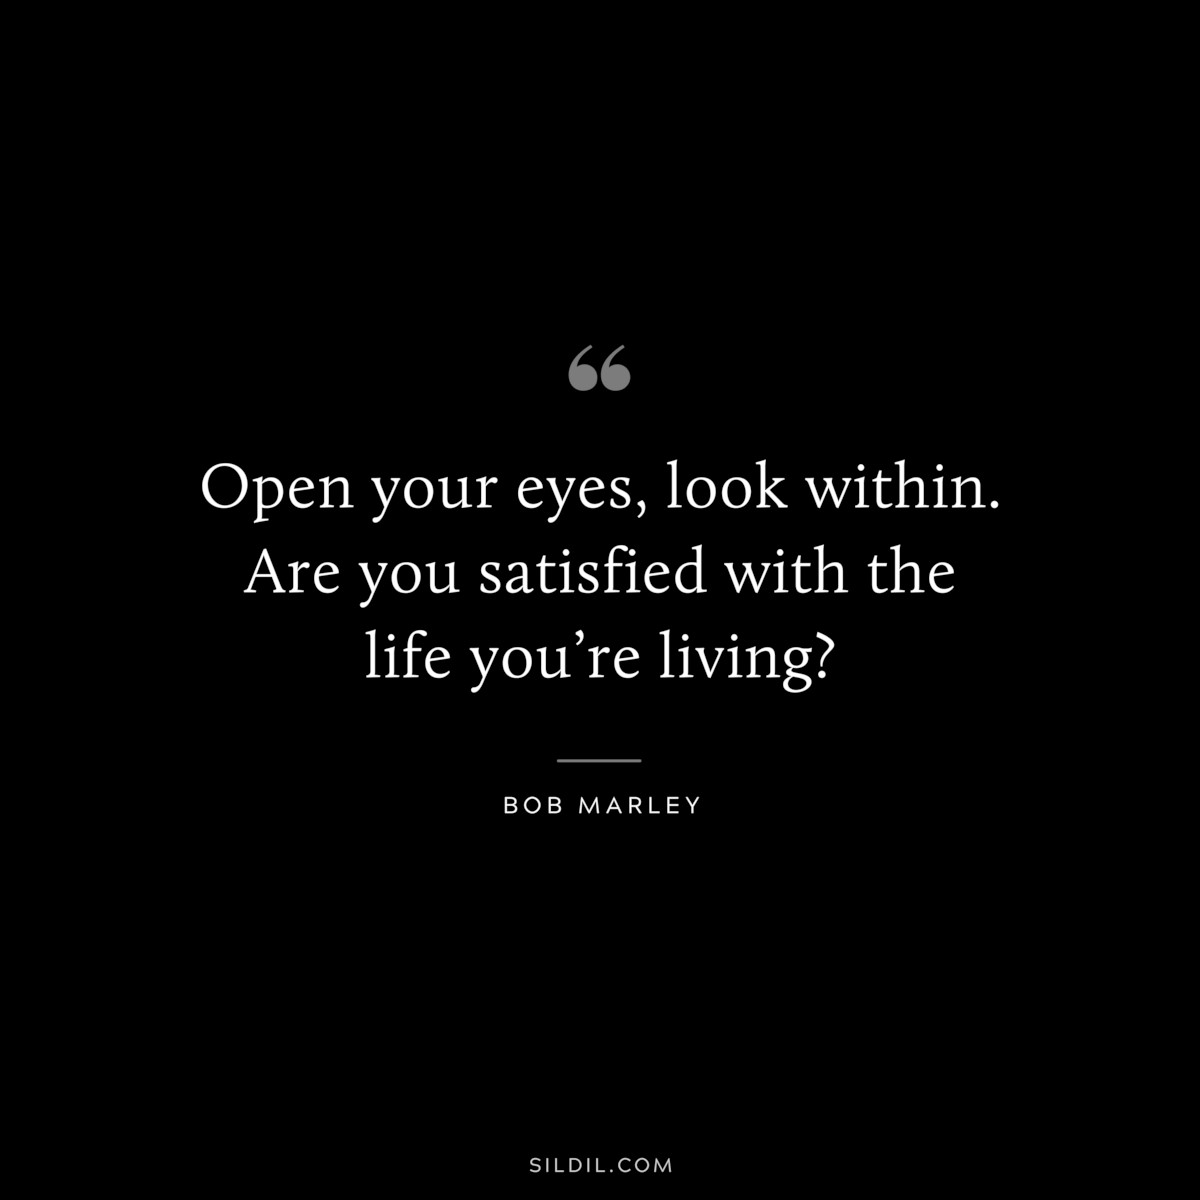 Open your eyes, look within. Are you satisfied with the life you’re living? ― Bob Marley